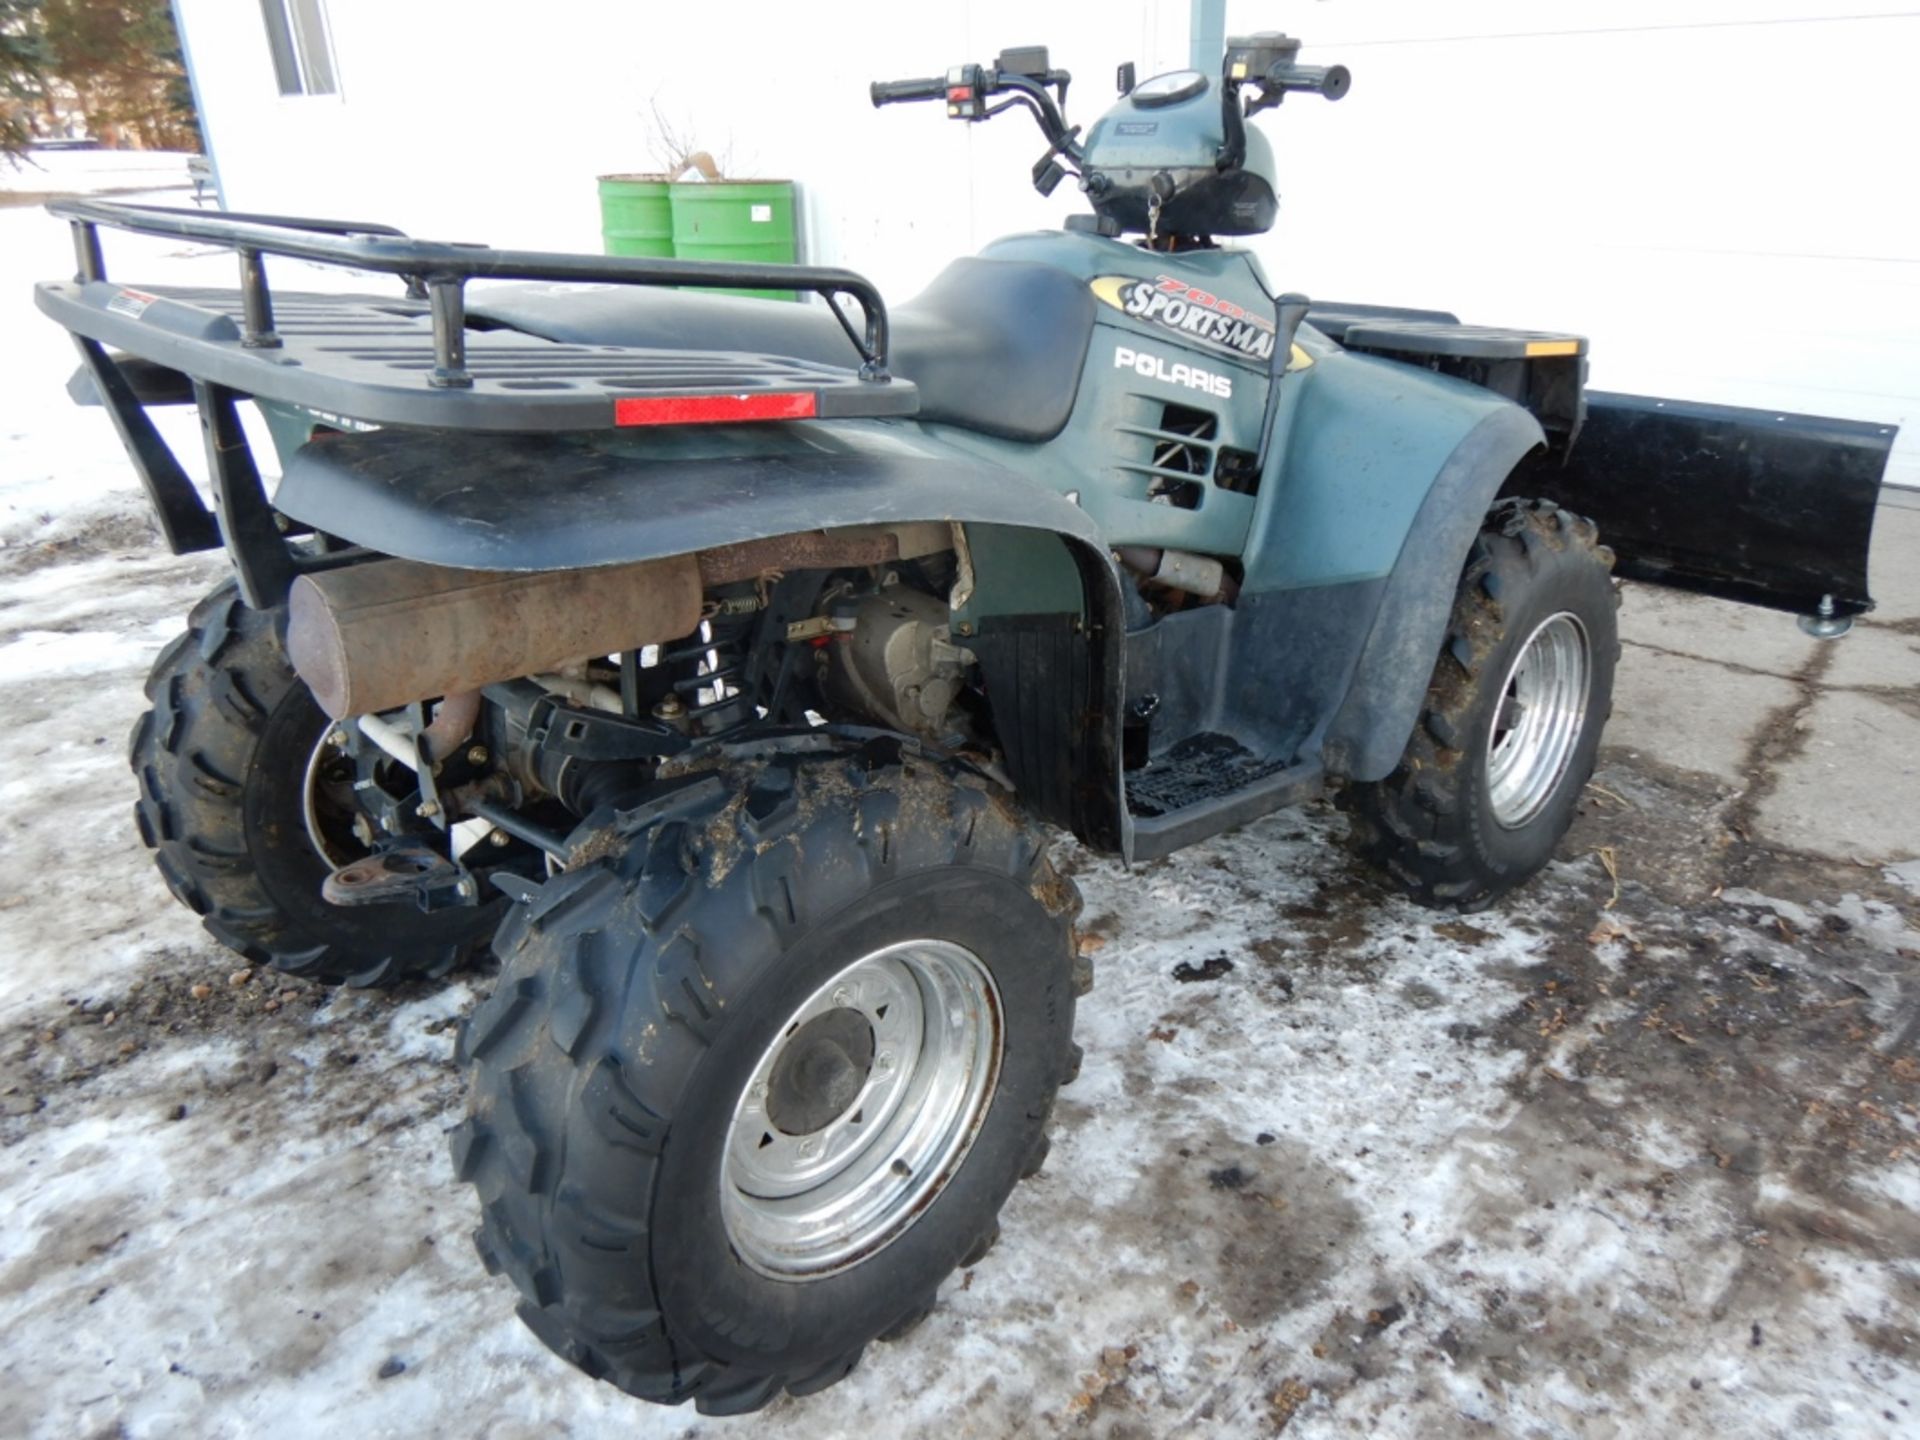 2002 POLARIS SPORTSMAN 700 ATV, AUTOMATIC, 4X4, 1404MILES SHOWING, 60IN SNOW BLADE, WINCH - Image 4 of 6